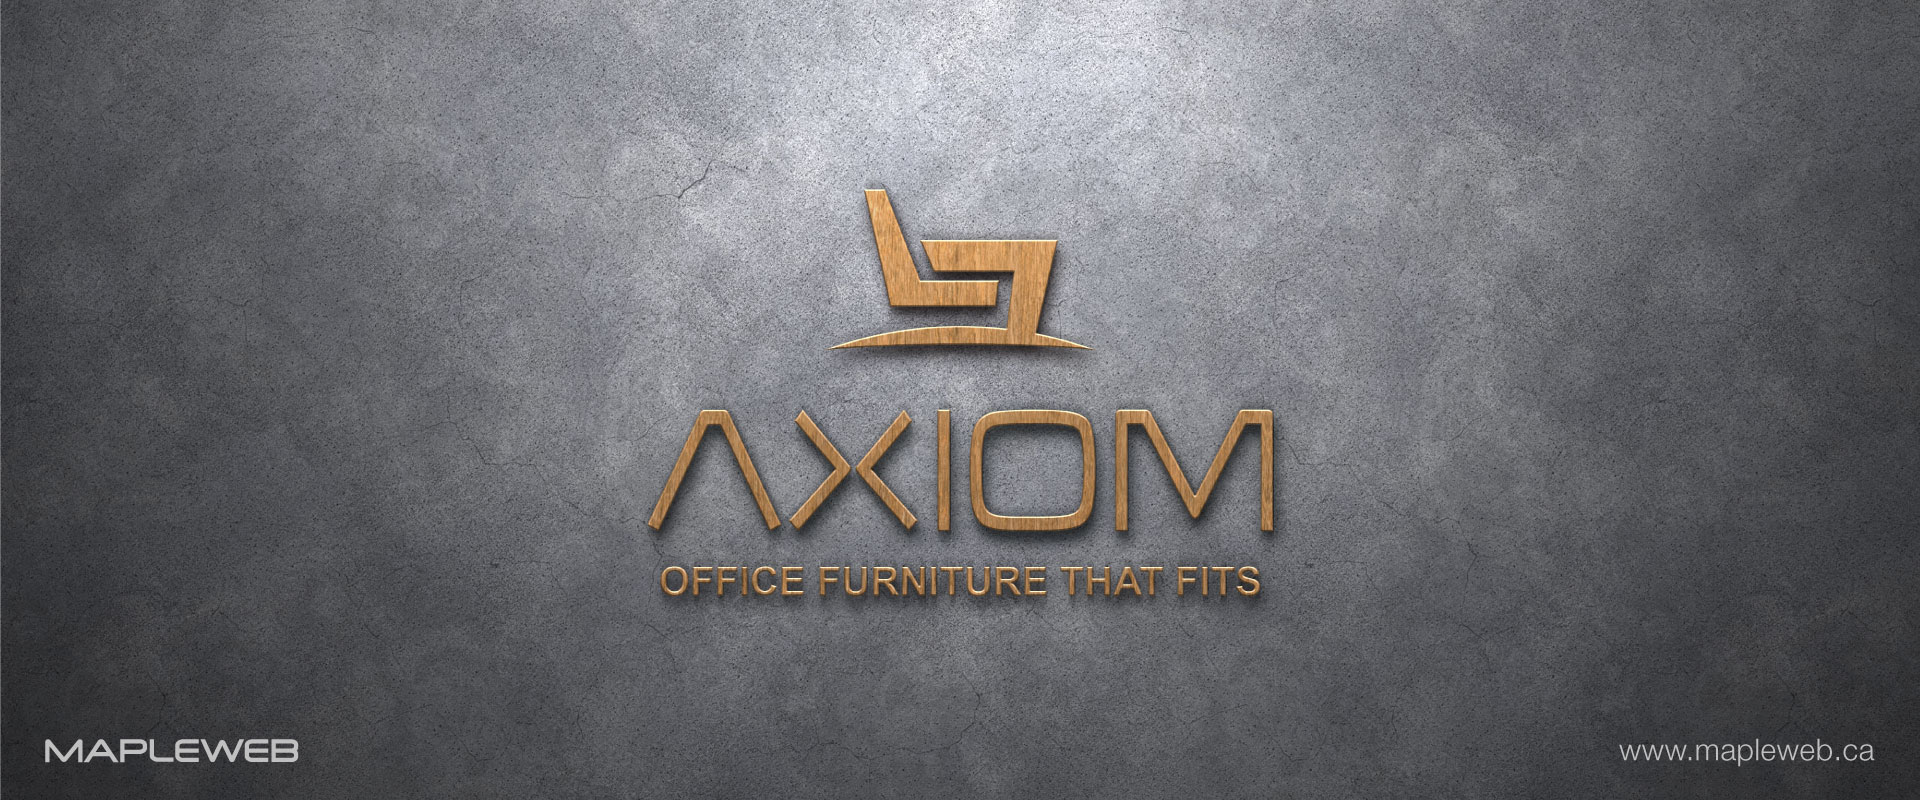 axiom-office furniture-brand-logo-design-by-mapleweb-vancouver-canada-wooden-texture-mock